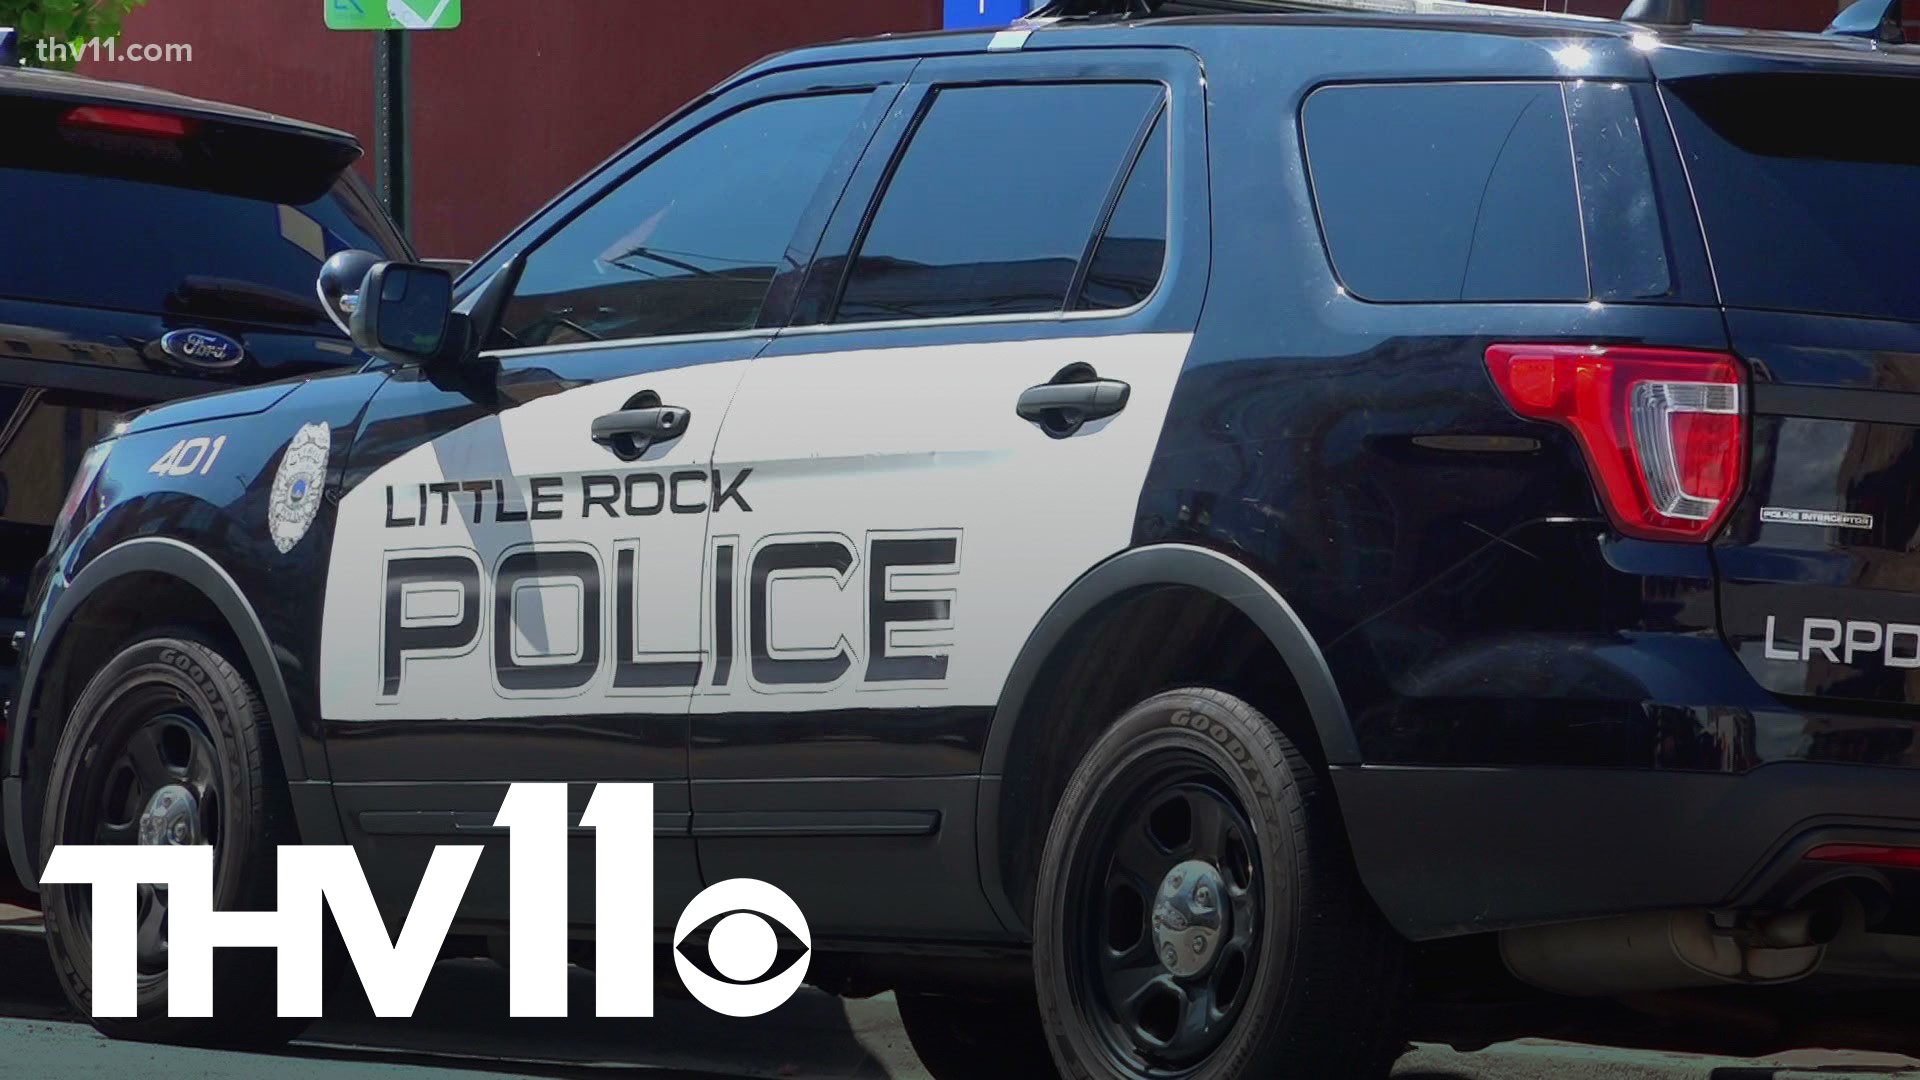 We've already seen a record of homicides in Little Rock this year, and the number is expected to climb in the next few months.